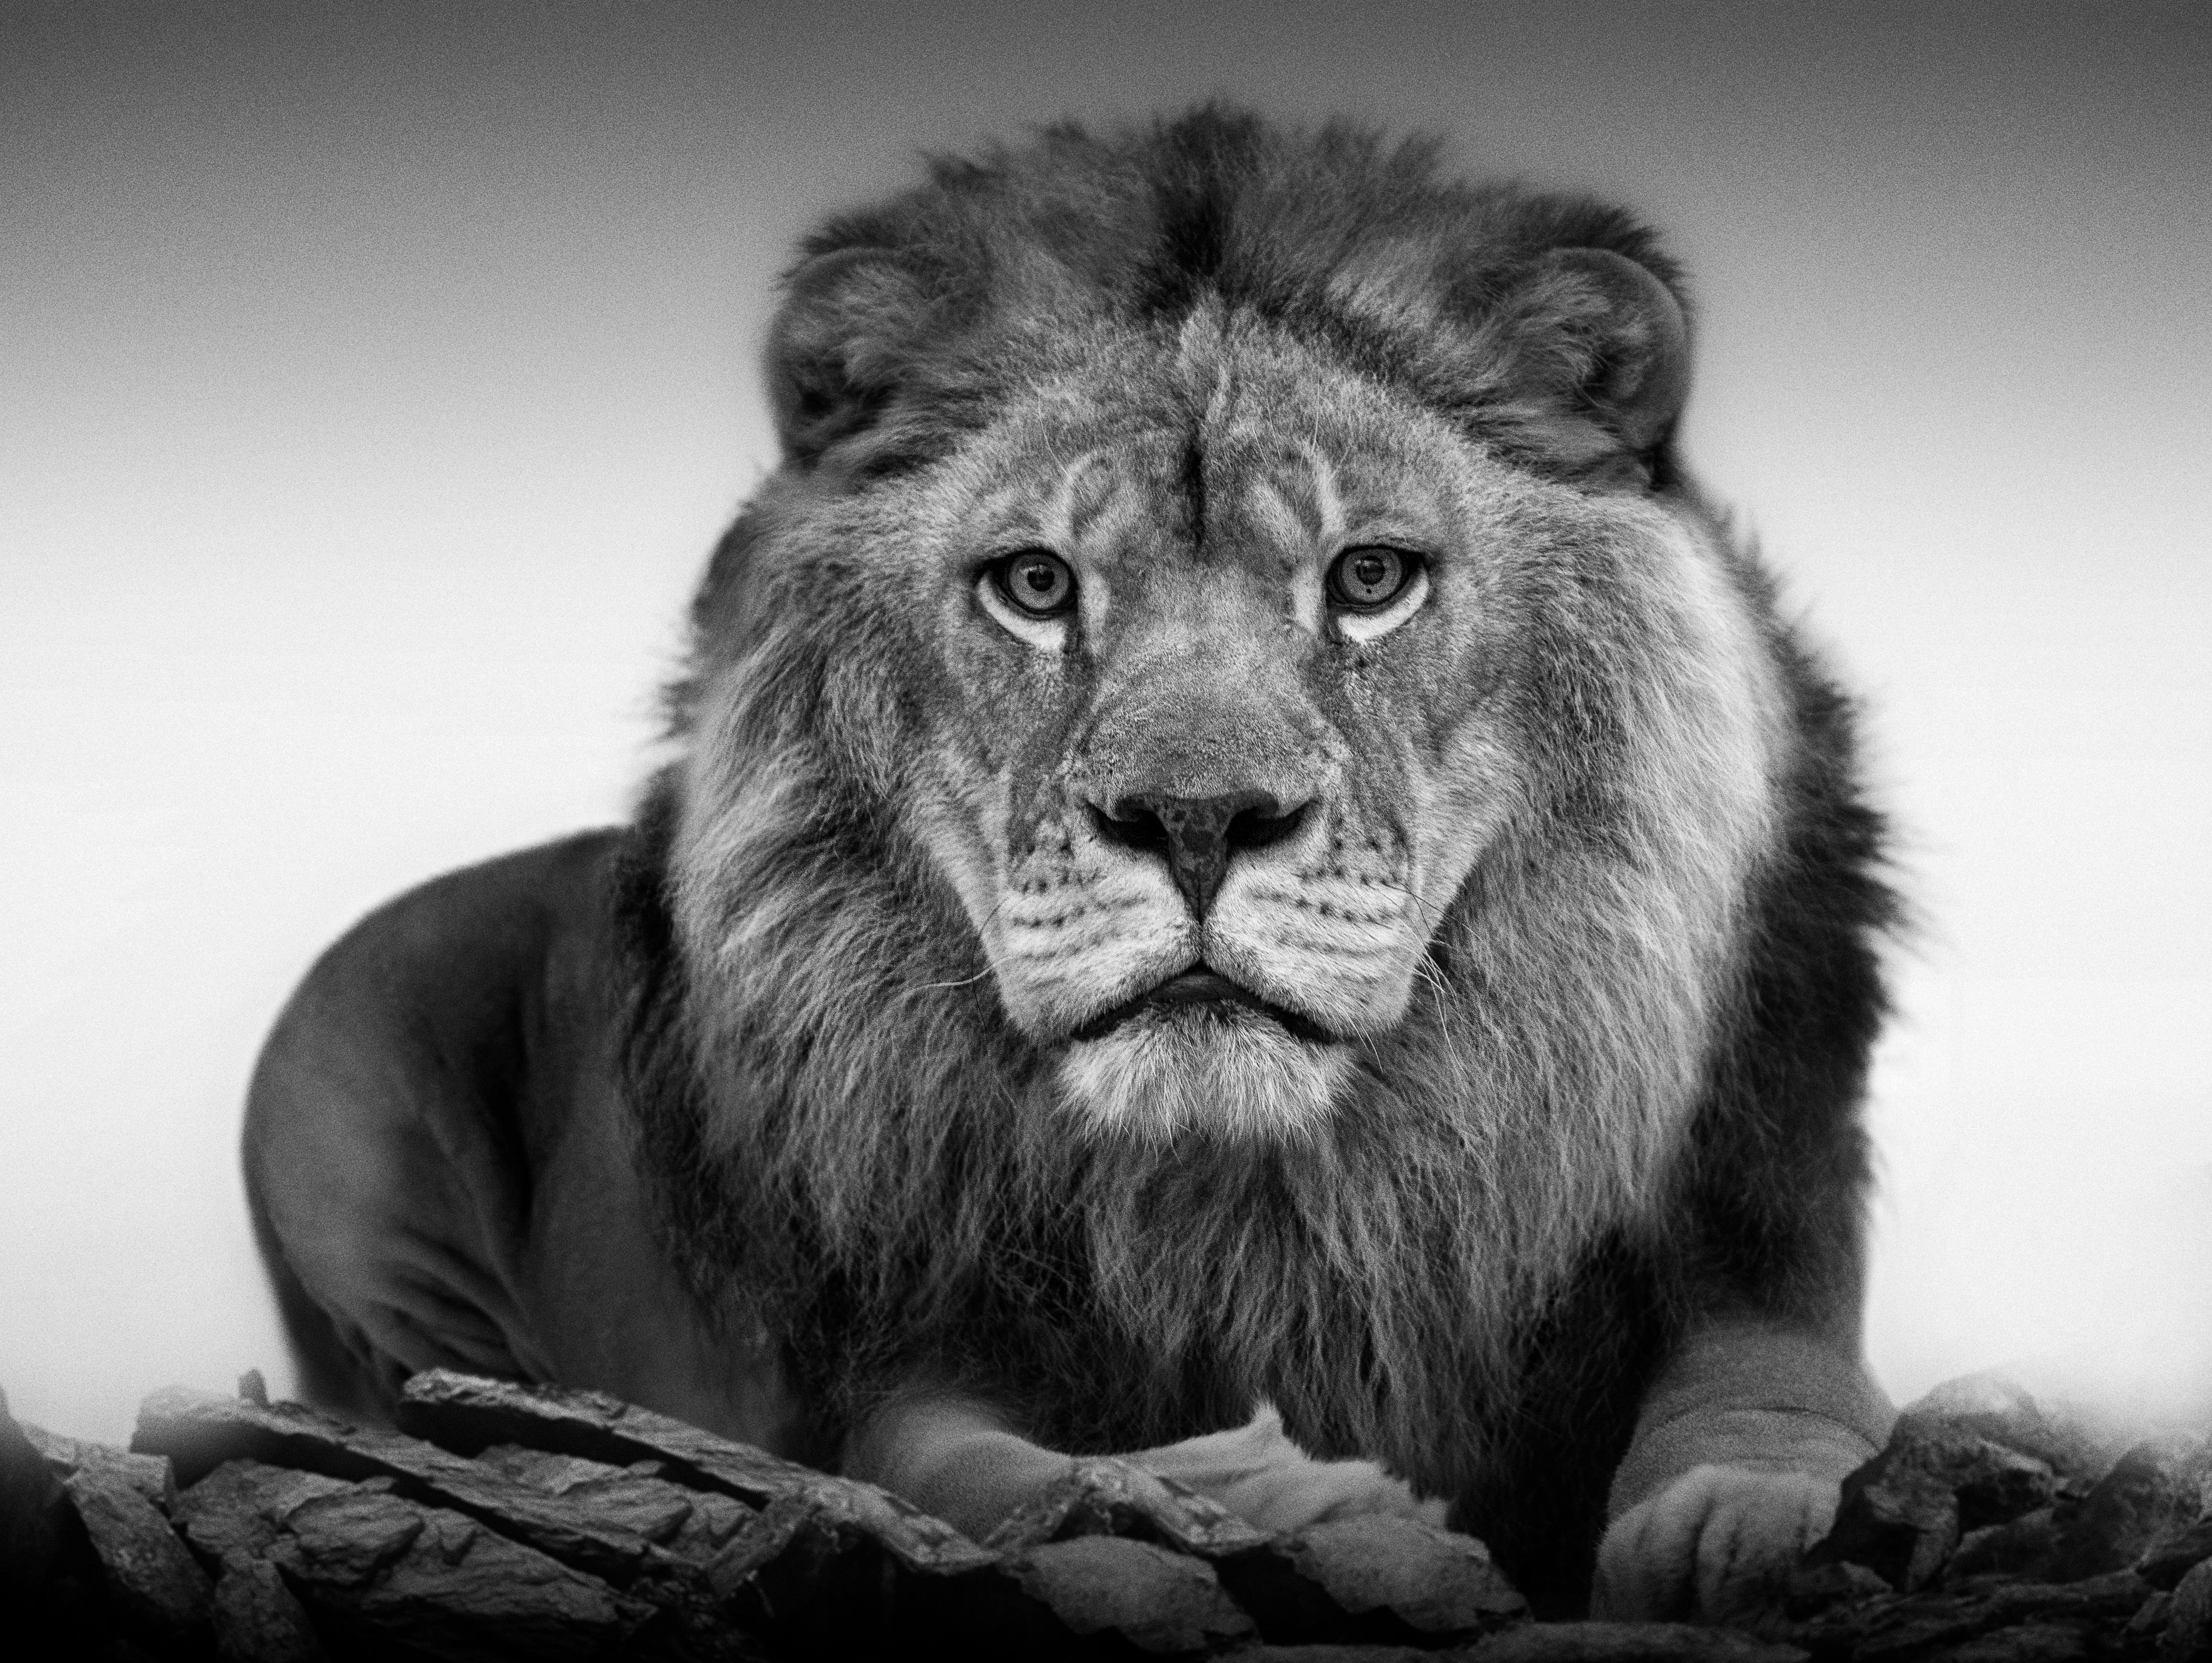 Shane Russeck Black and White Photograph - "Lion Portrait"- 24x36  African Lion  Black & White Photography  Photograph Art